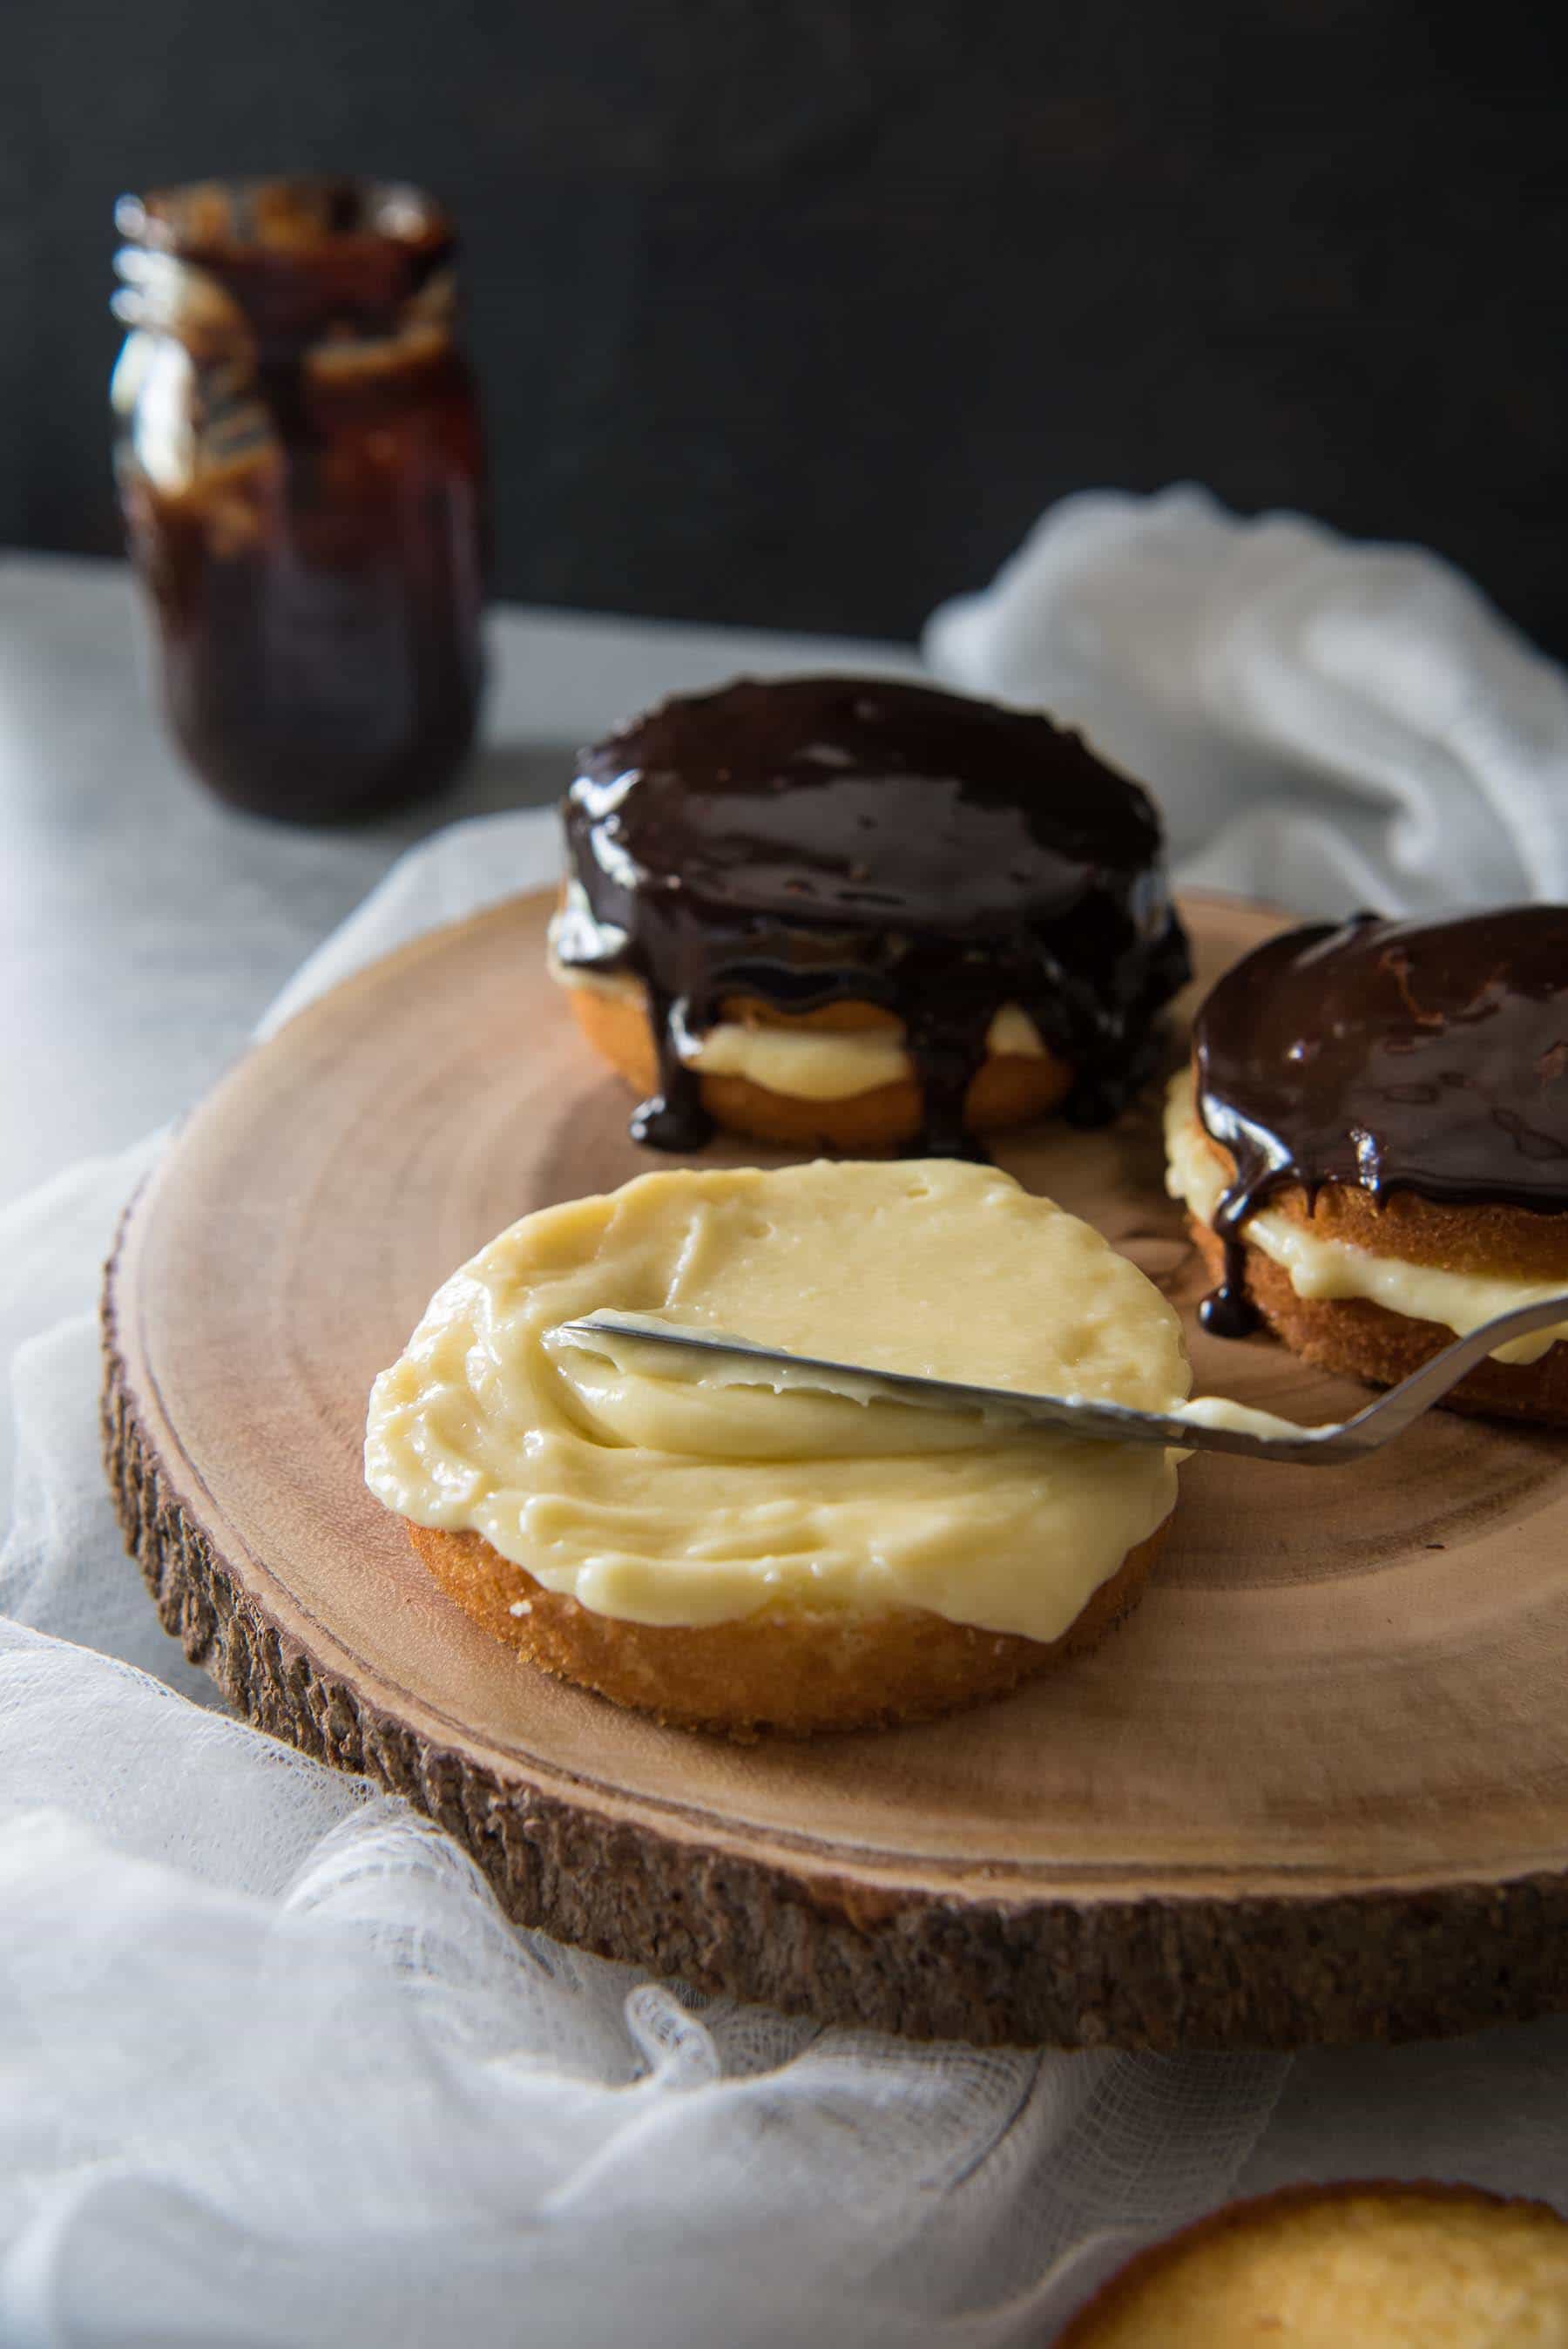 There's nothing quite like a classic Boston Cream Pie...since it's actually a cake! Rich, thick pastry cream is sandwiched between two layers of buttery yellow cake, then topped with a dark chocolate glaze.